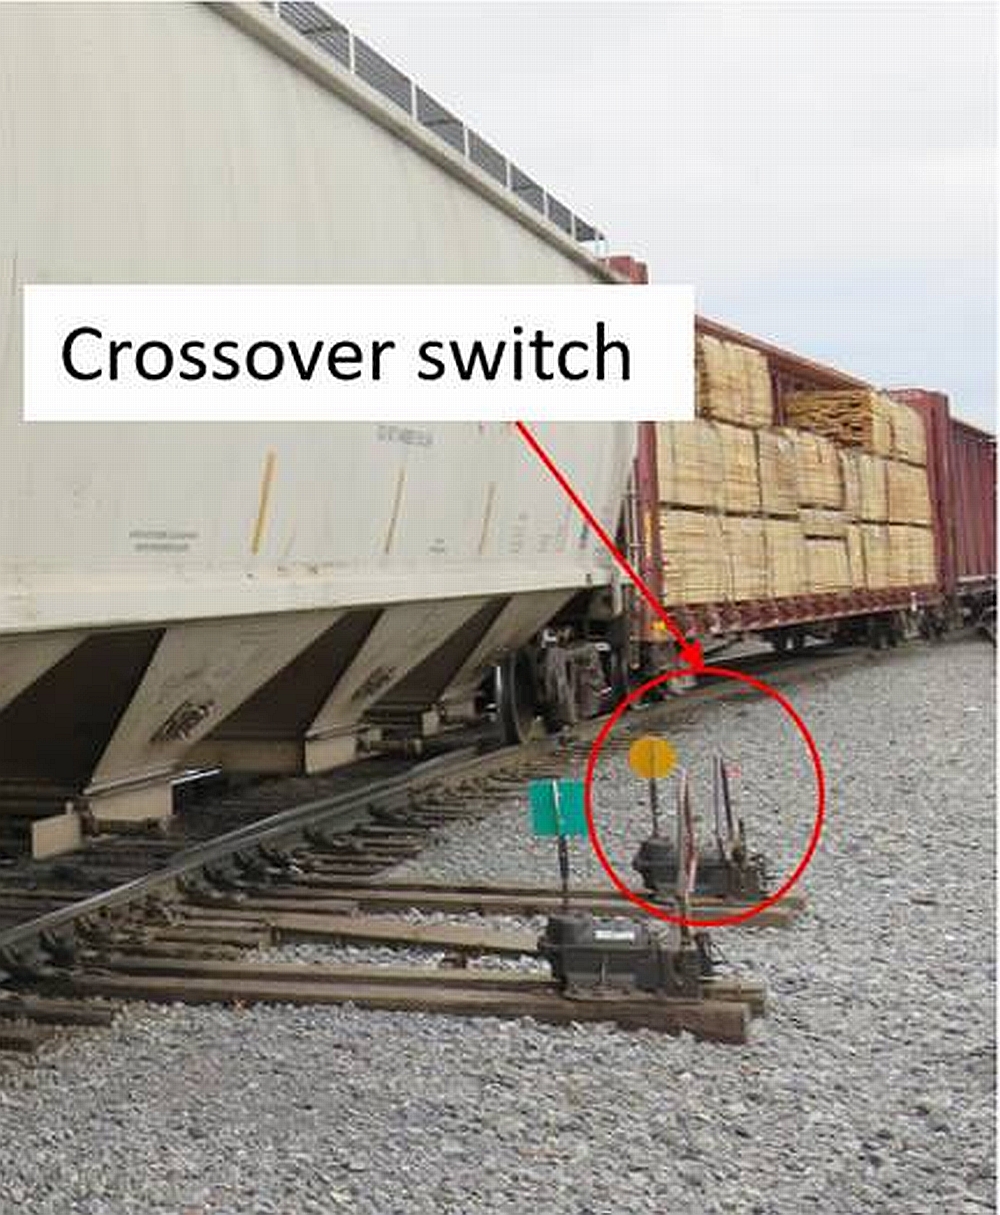  2WL/WL crossover switch connecting the 2nd West Loop to the West Loop, in the reverse position (Source: TSB)